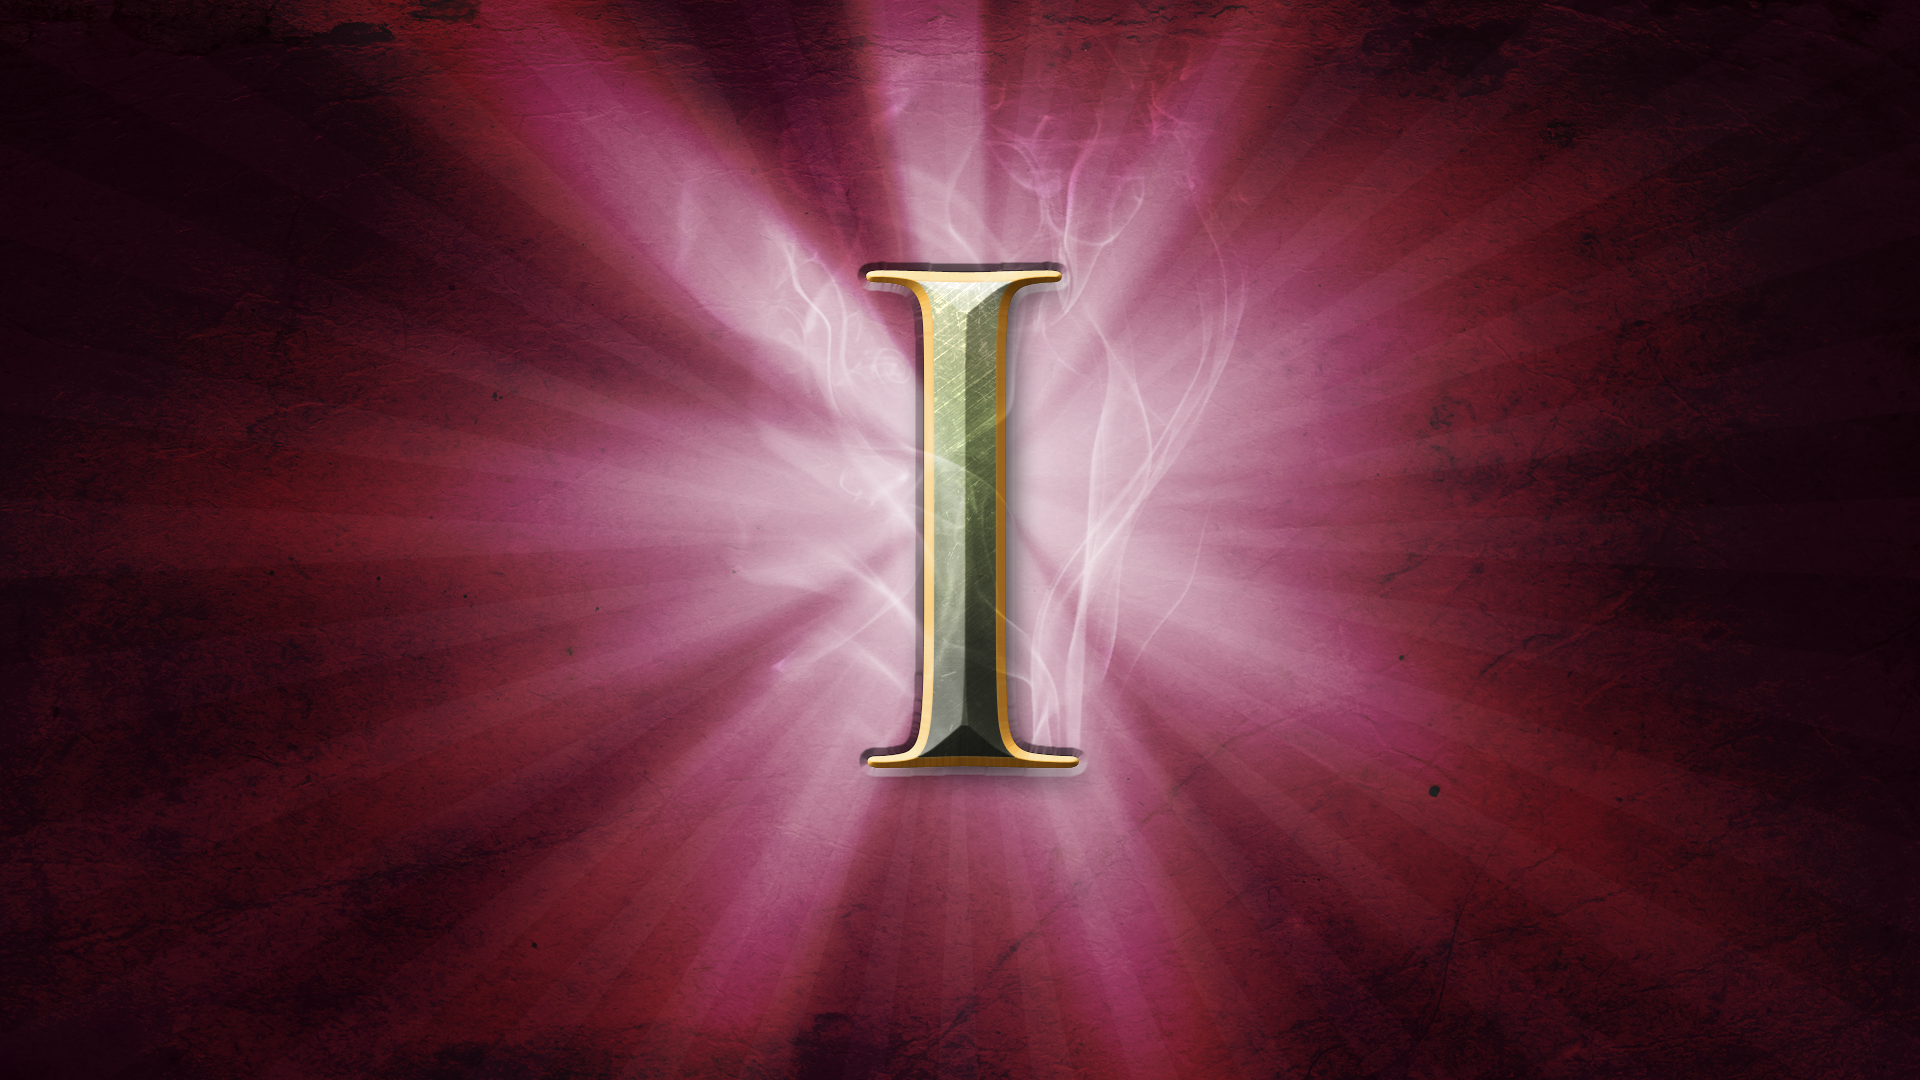 Icon for Act 1 completion